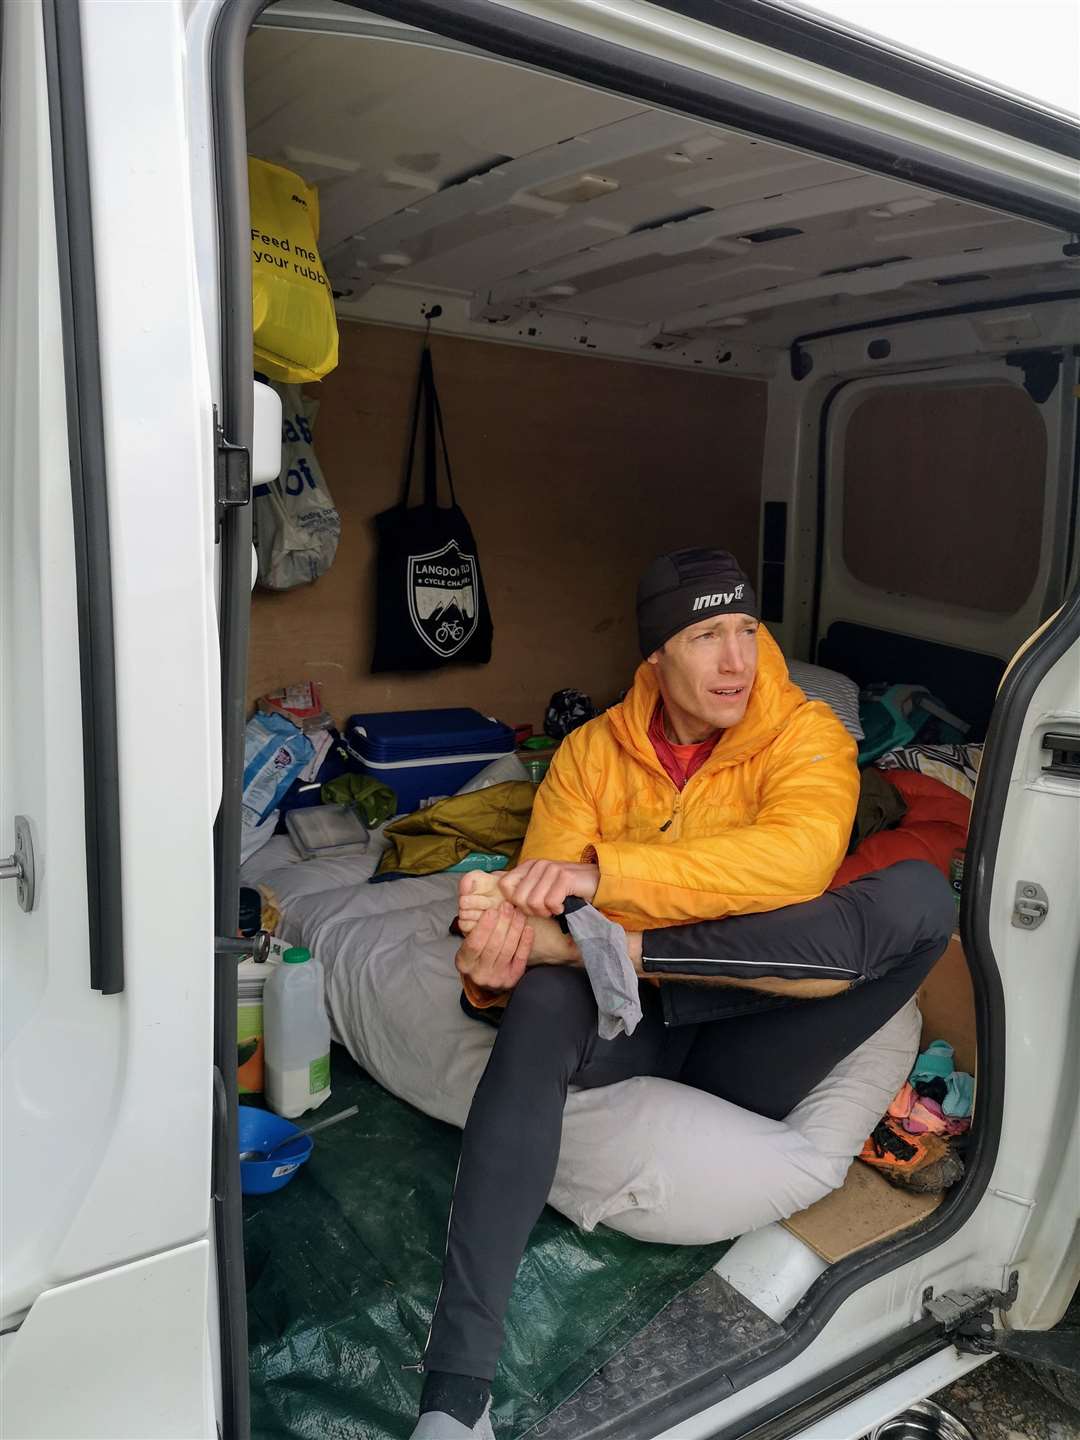 Looking after his feet in the van during a support stop.